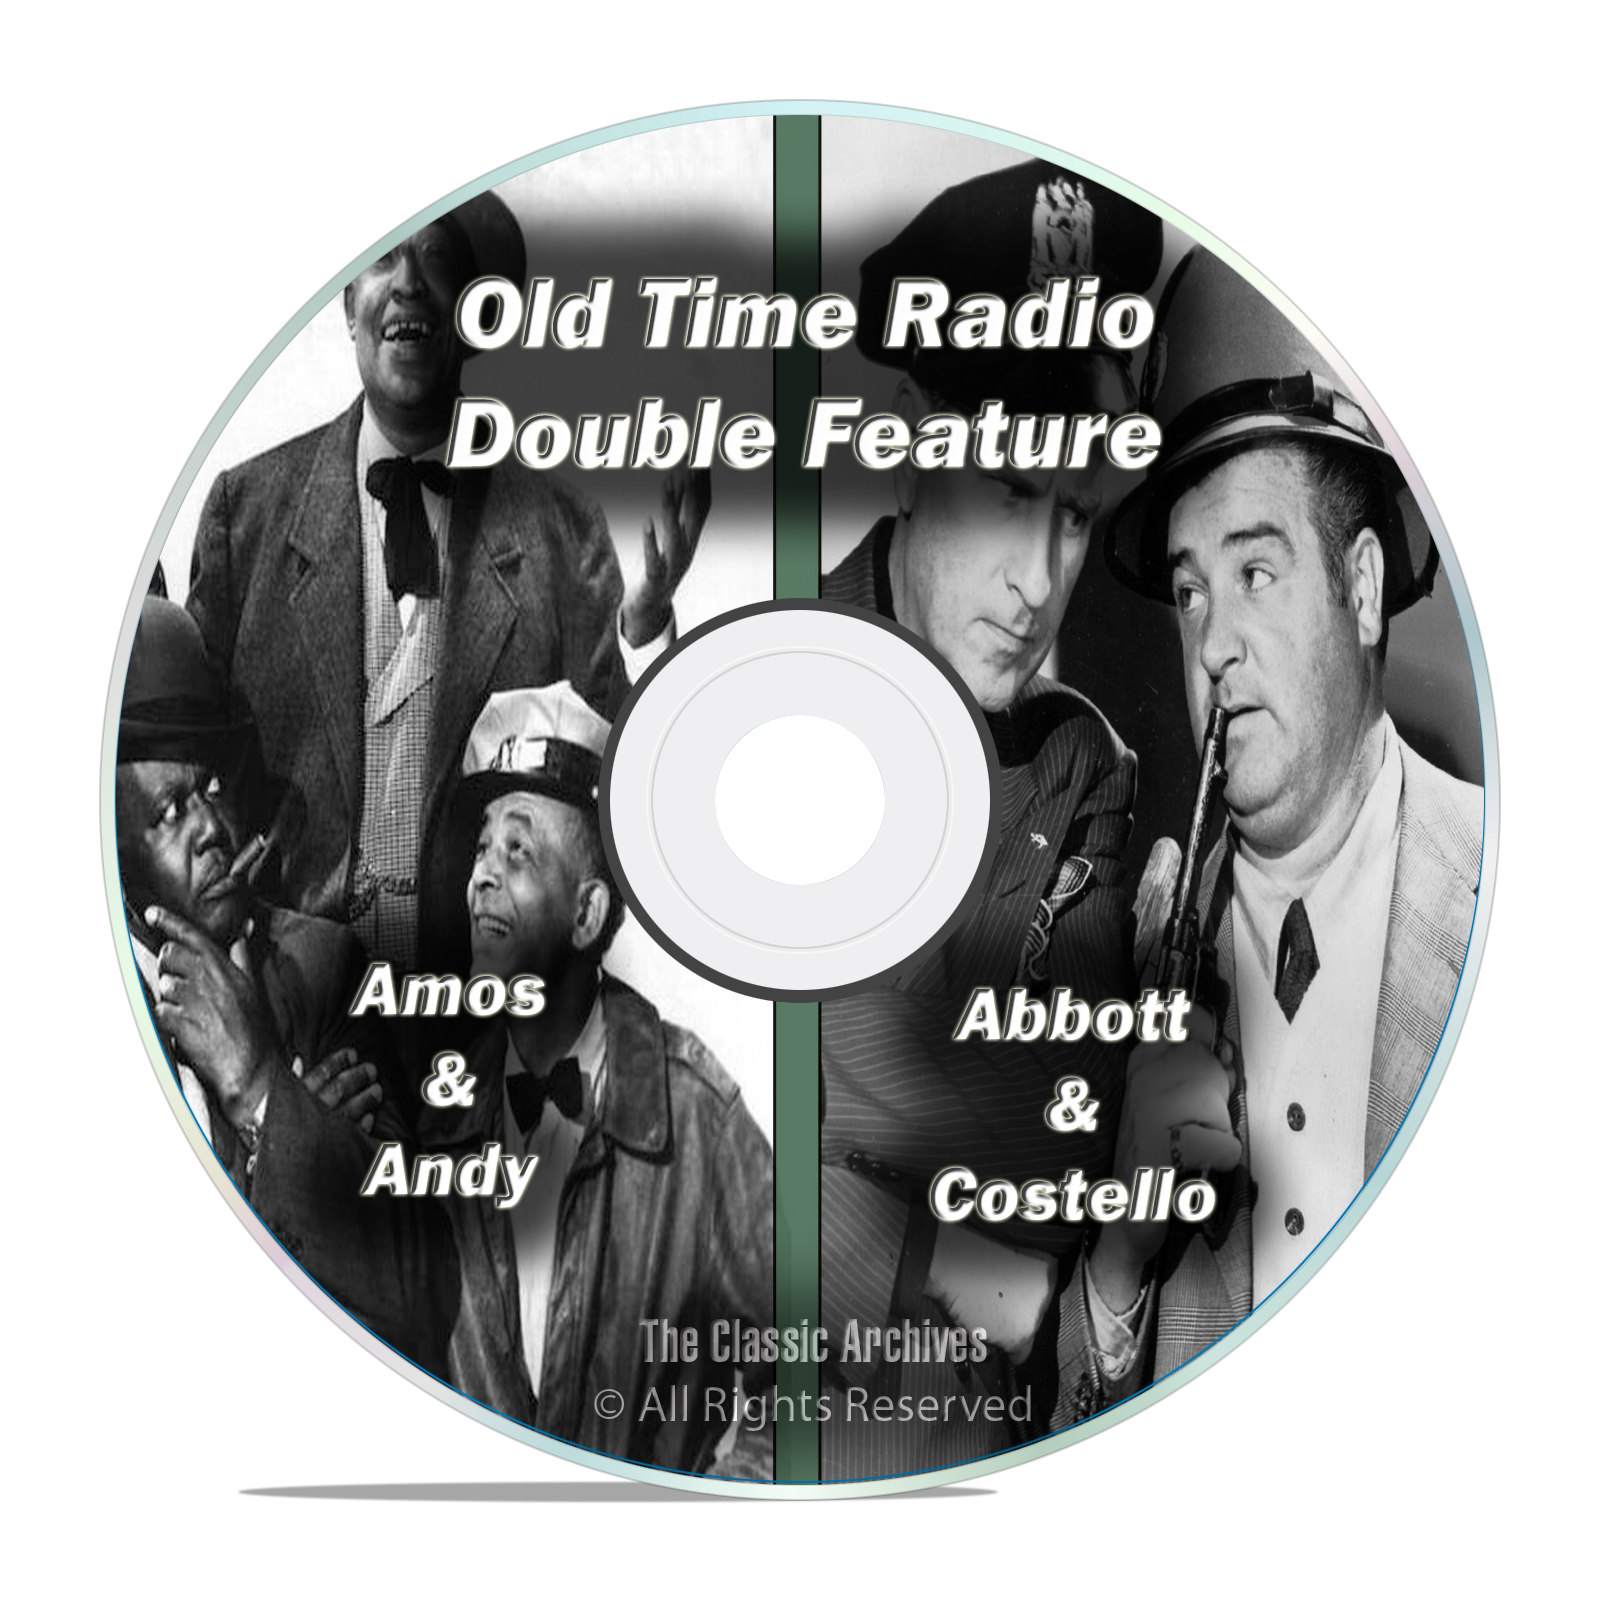 Amos & Andy, Abbott & Costello, 707 FULL RUN COMPLETE SHOWS, OTR MP3 DVD - Click Image to Close